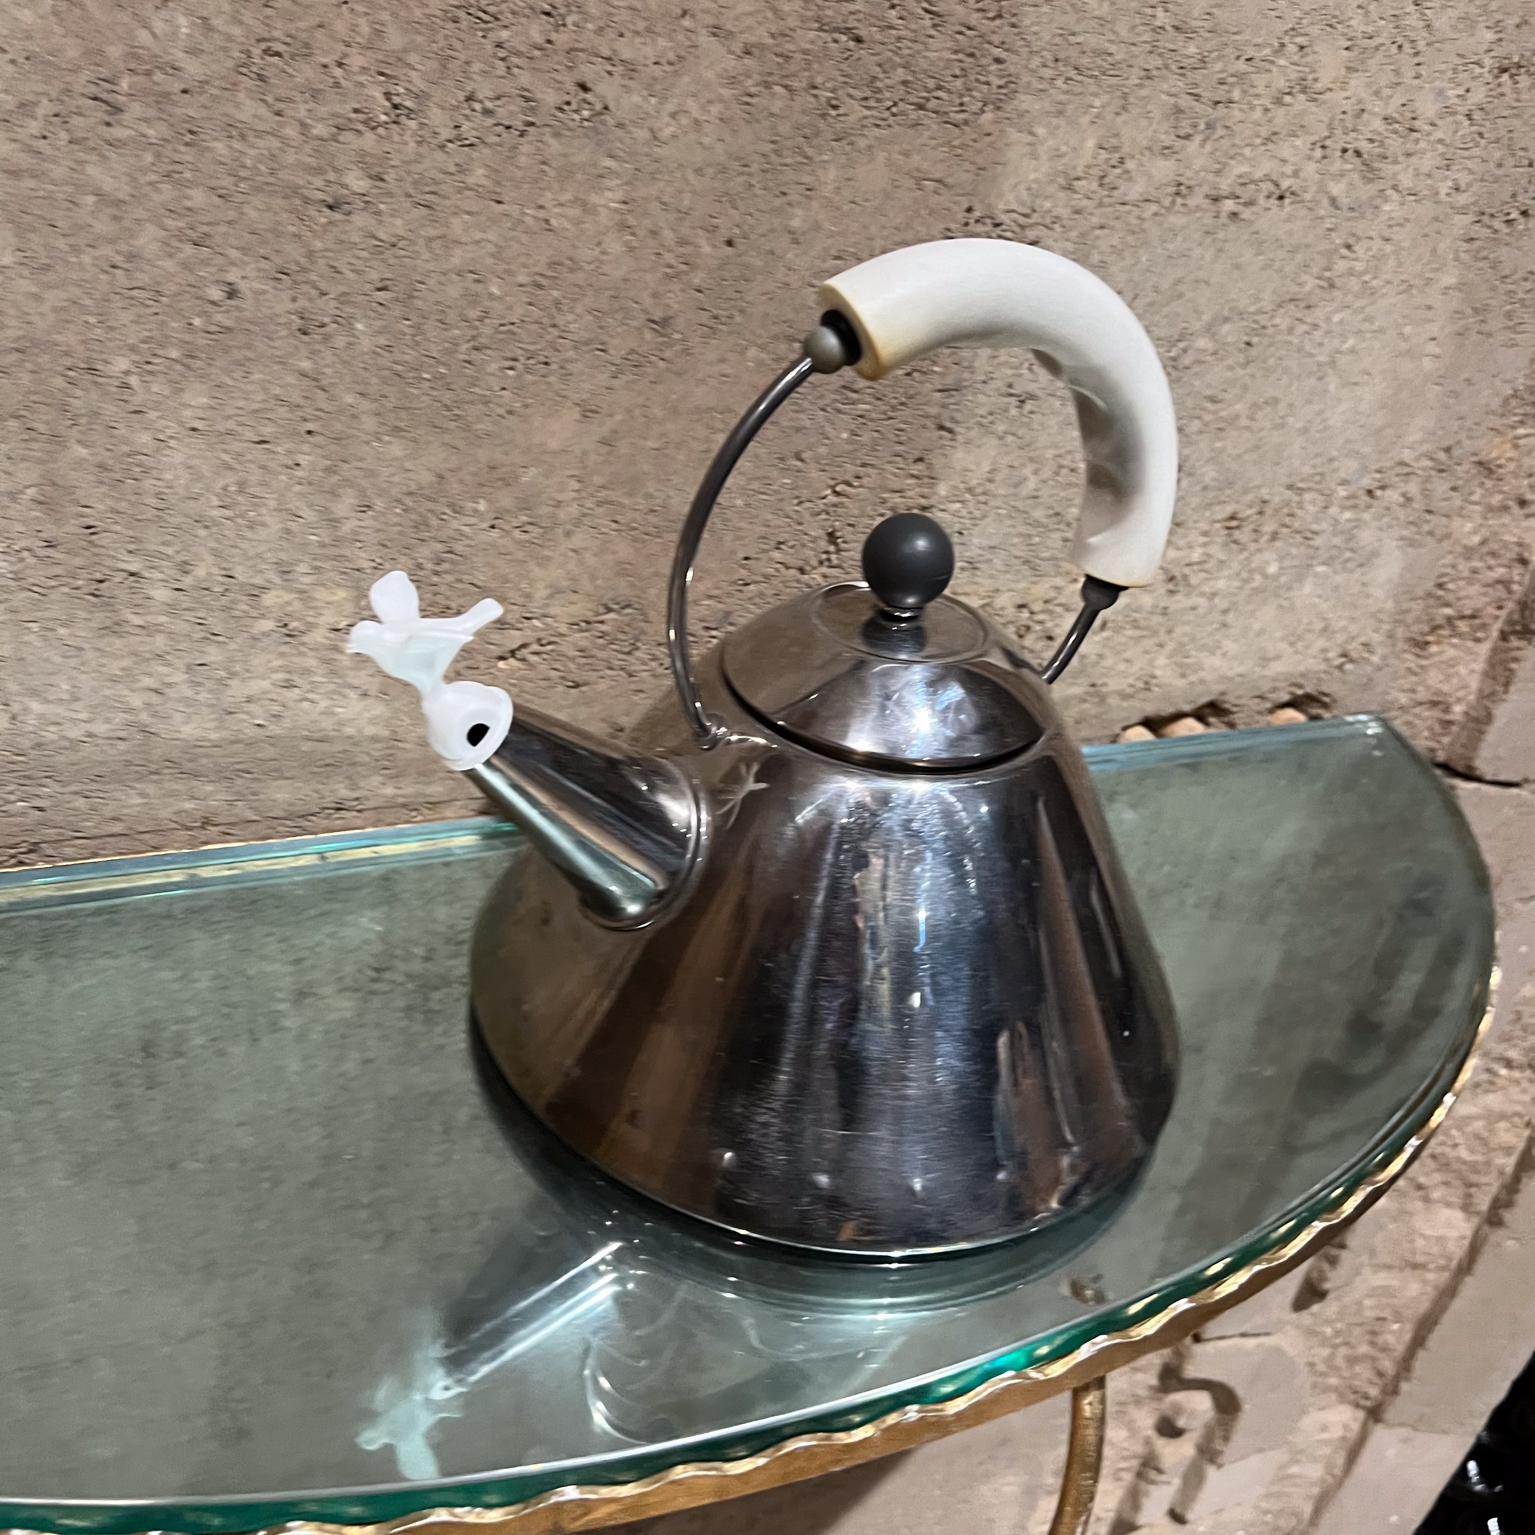 1980s Alessi 9093 Modernist Kettle Stainless Steel White
maker stamped
9.5 h x 8.75 diameter x 9.75 d
Not new, preowned unrestored vintage condition.
Comes with new bird whistle.
See all images provided.
We can ship to you.